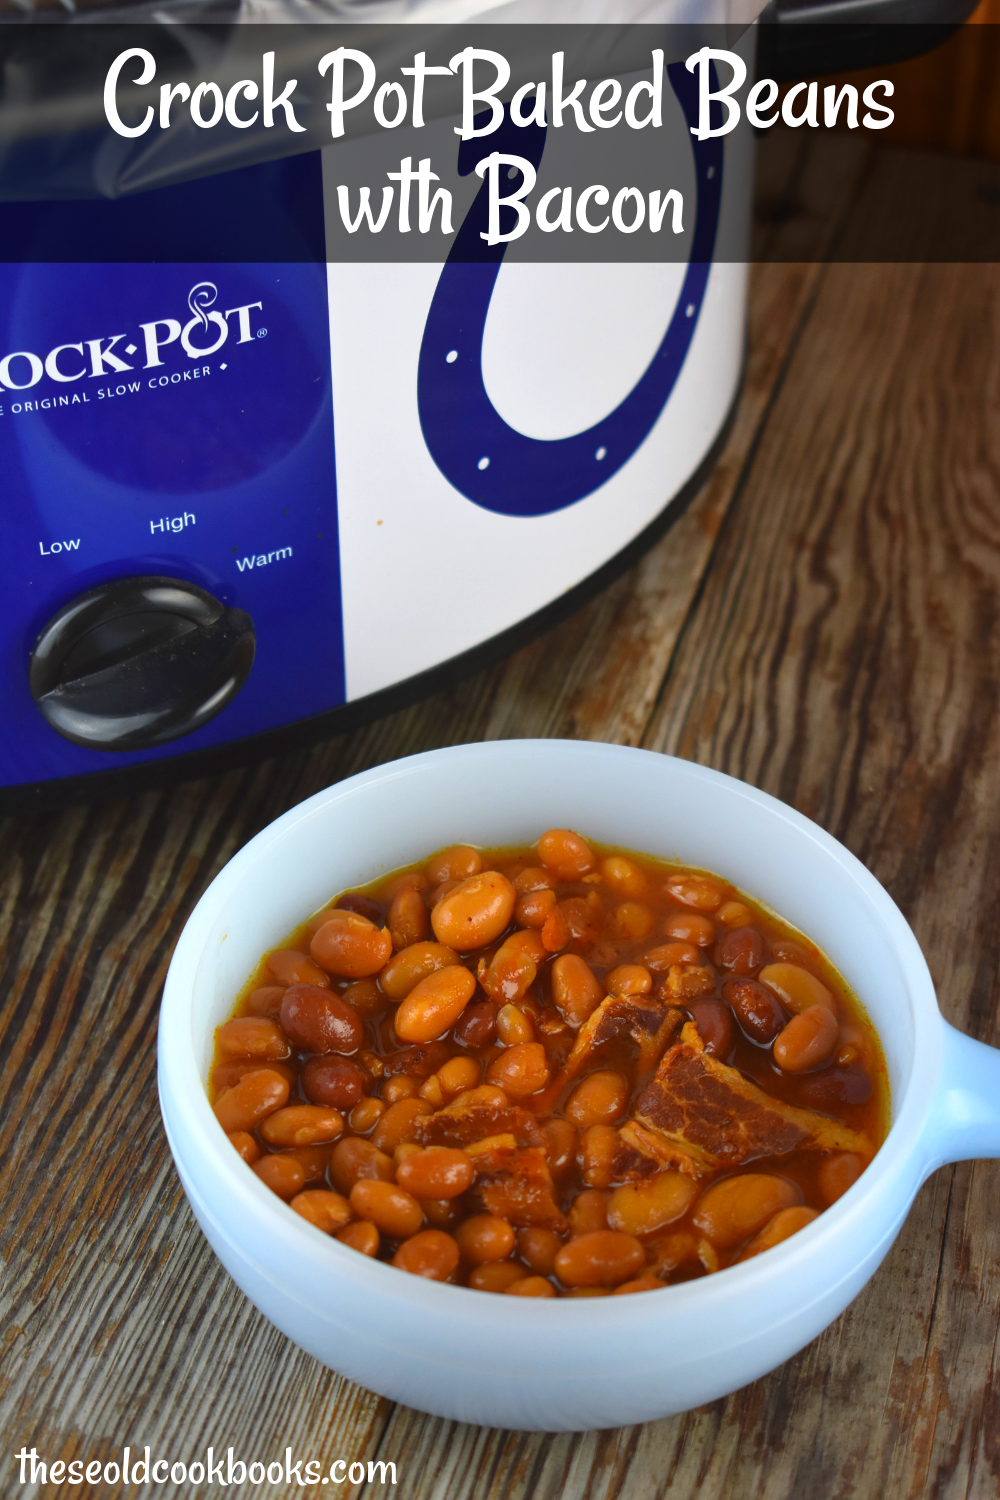 Crock Pot Baked Beans with Bacon is an easy recipe to throw together for your next party.  A combination of canned beans are bathed in a sweet brown sugar and ketchup based sauce that will compliment any entree.